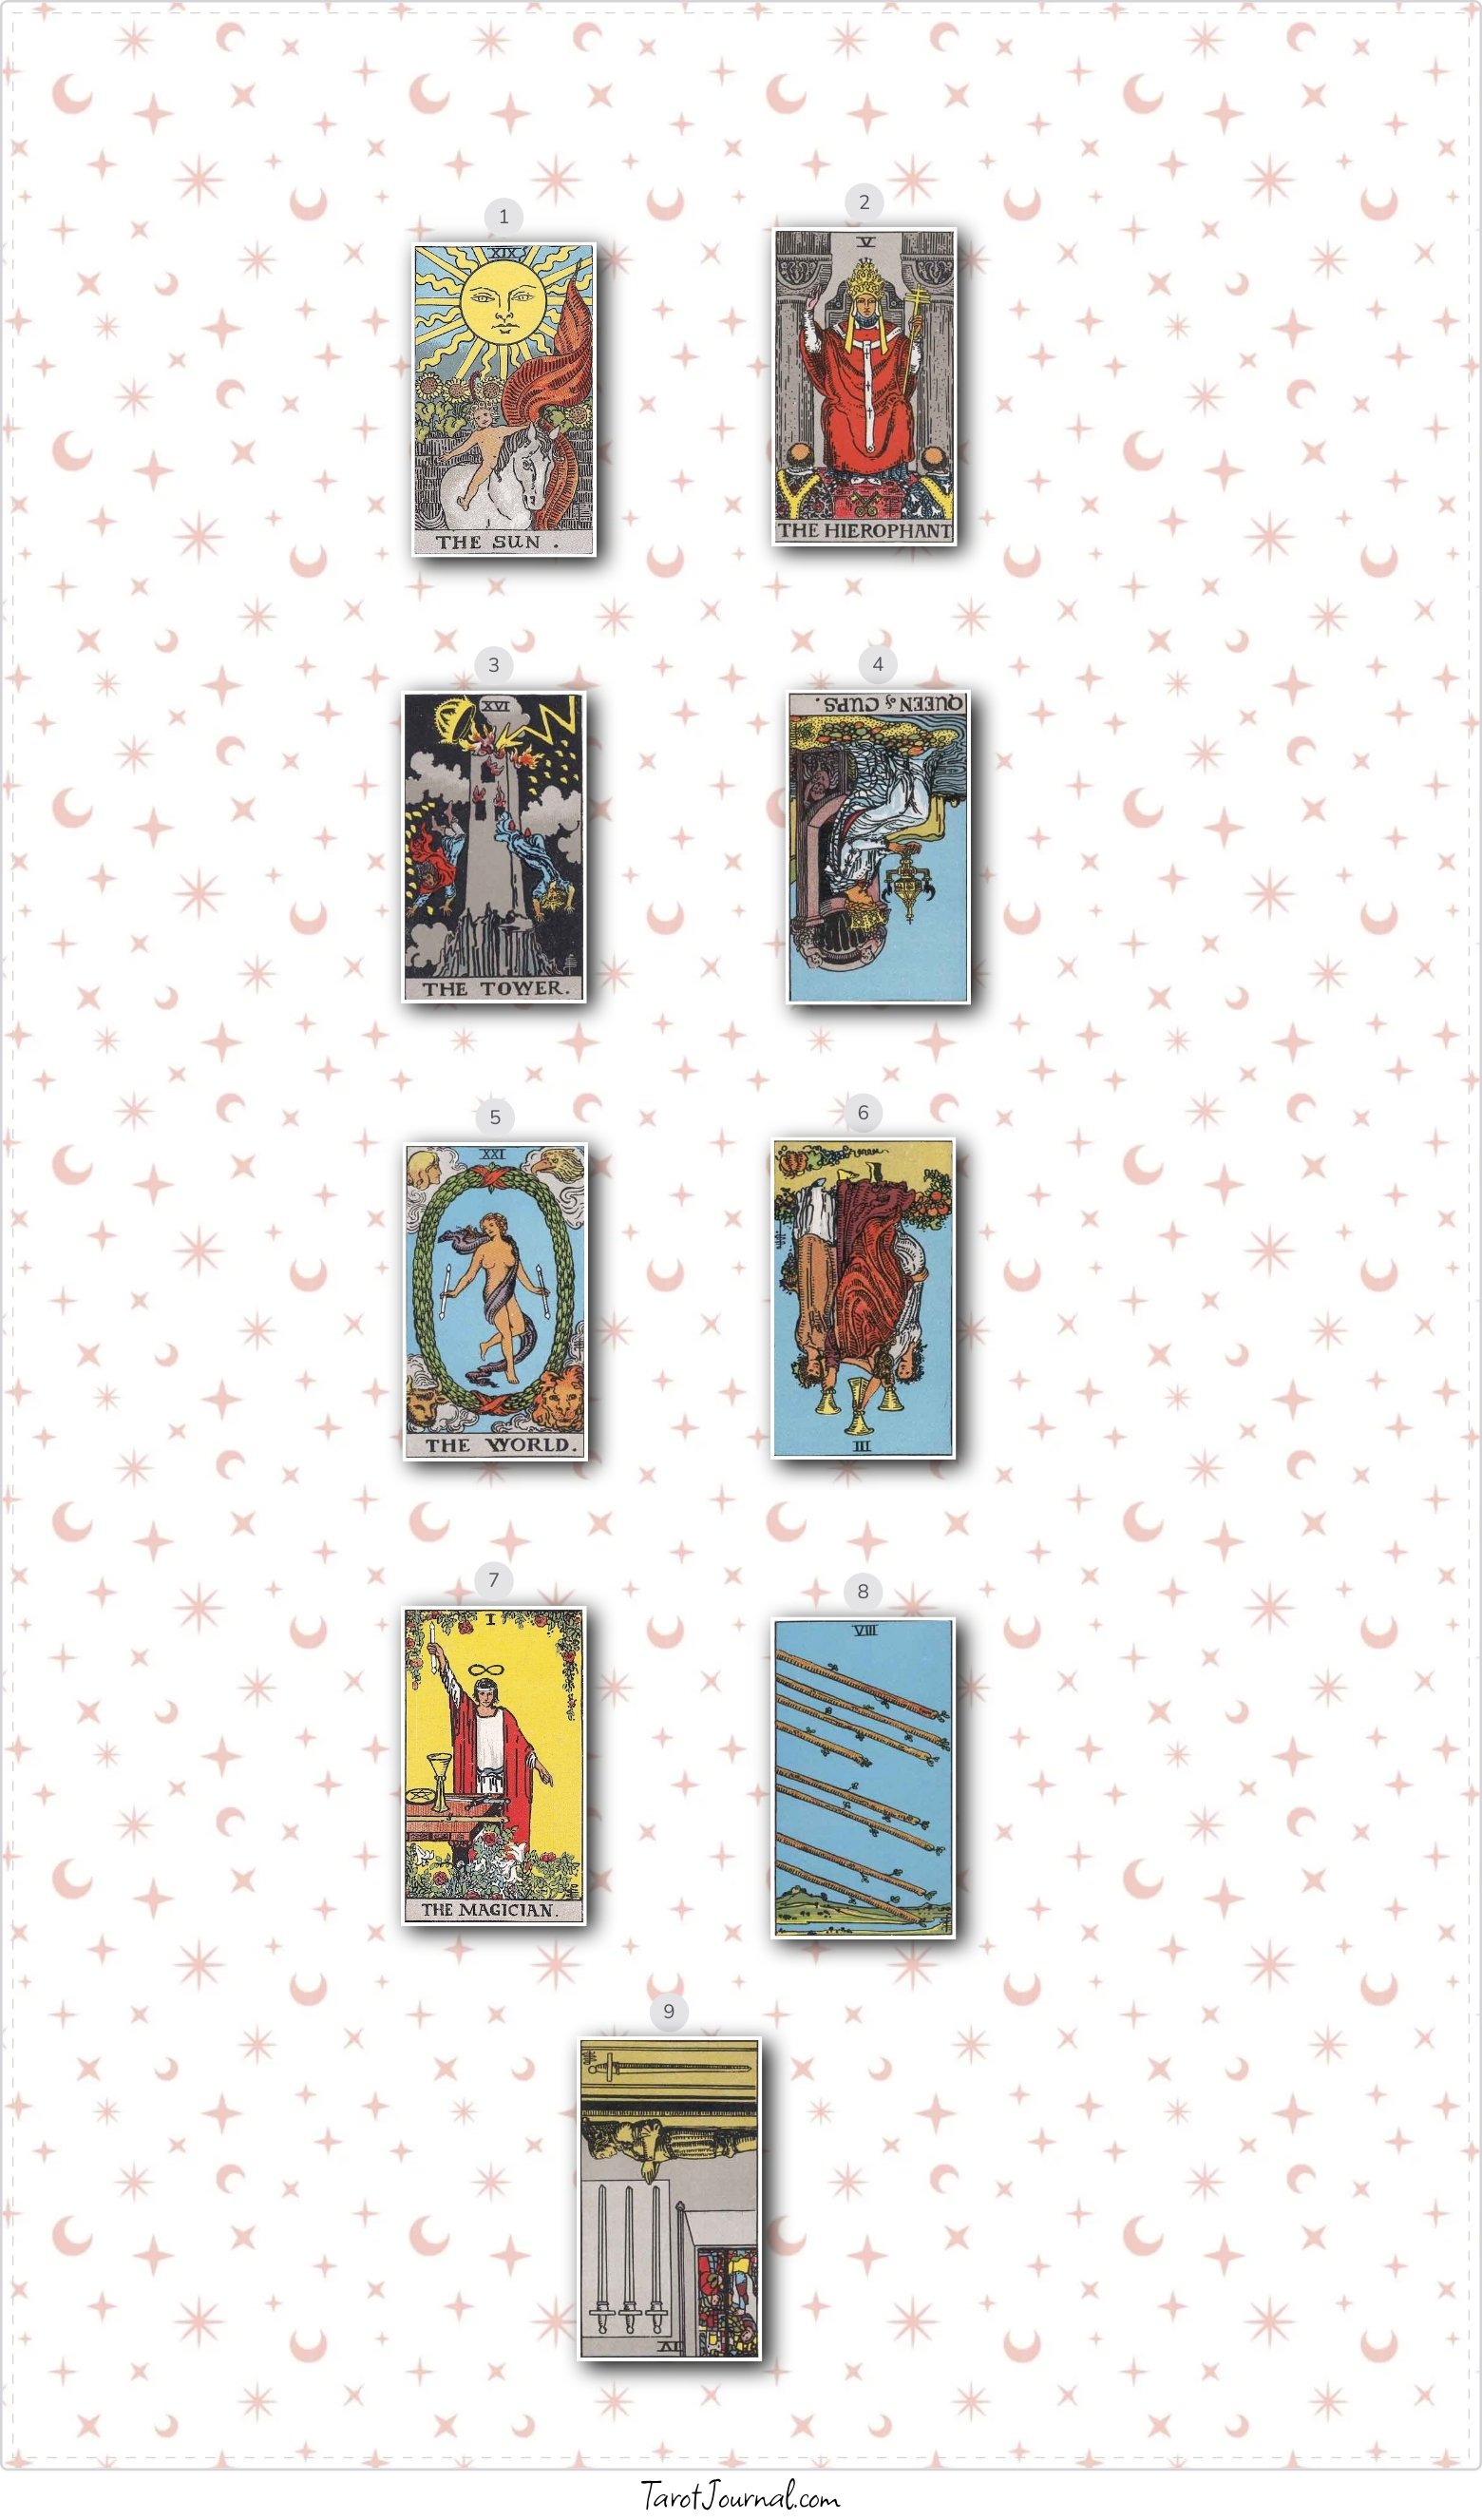 Find out if there is hope for a future where you are back with the one you love. - tarot reading by Tony Delahoussaye